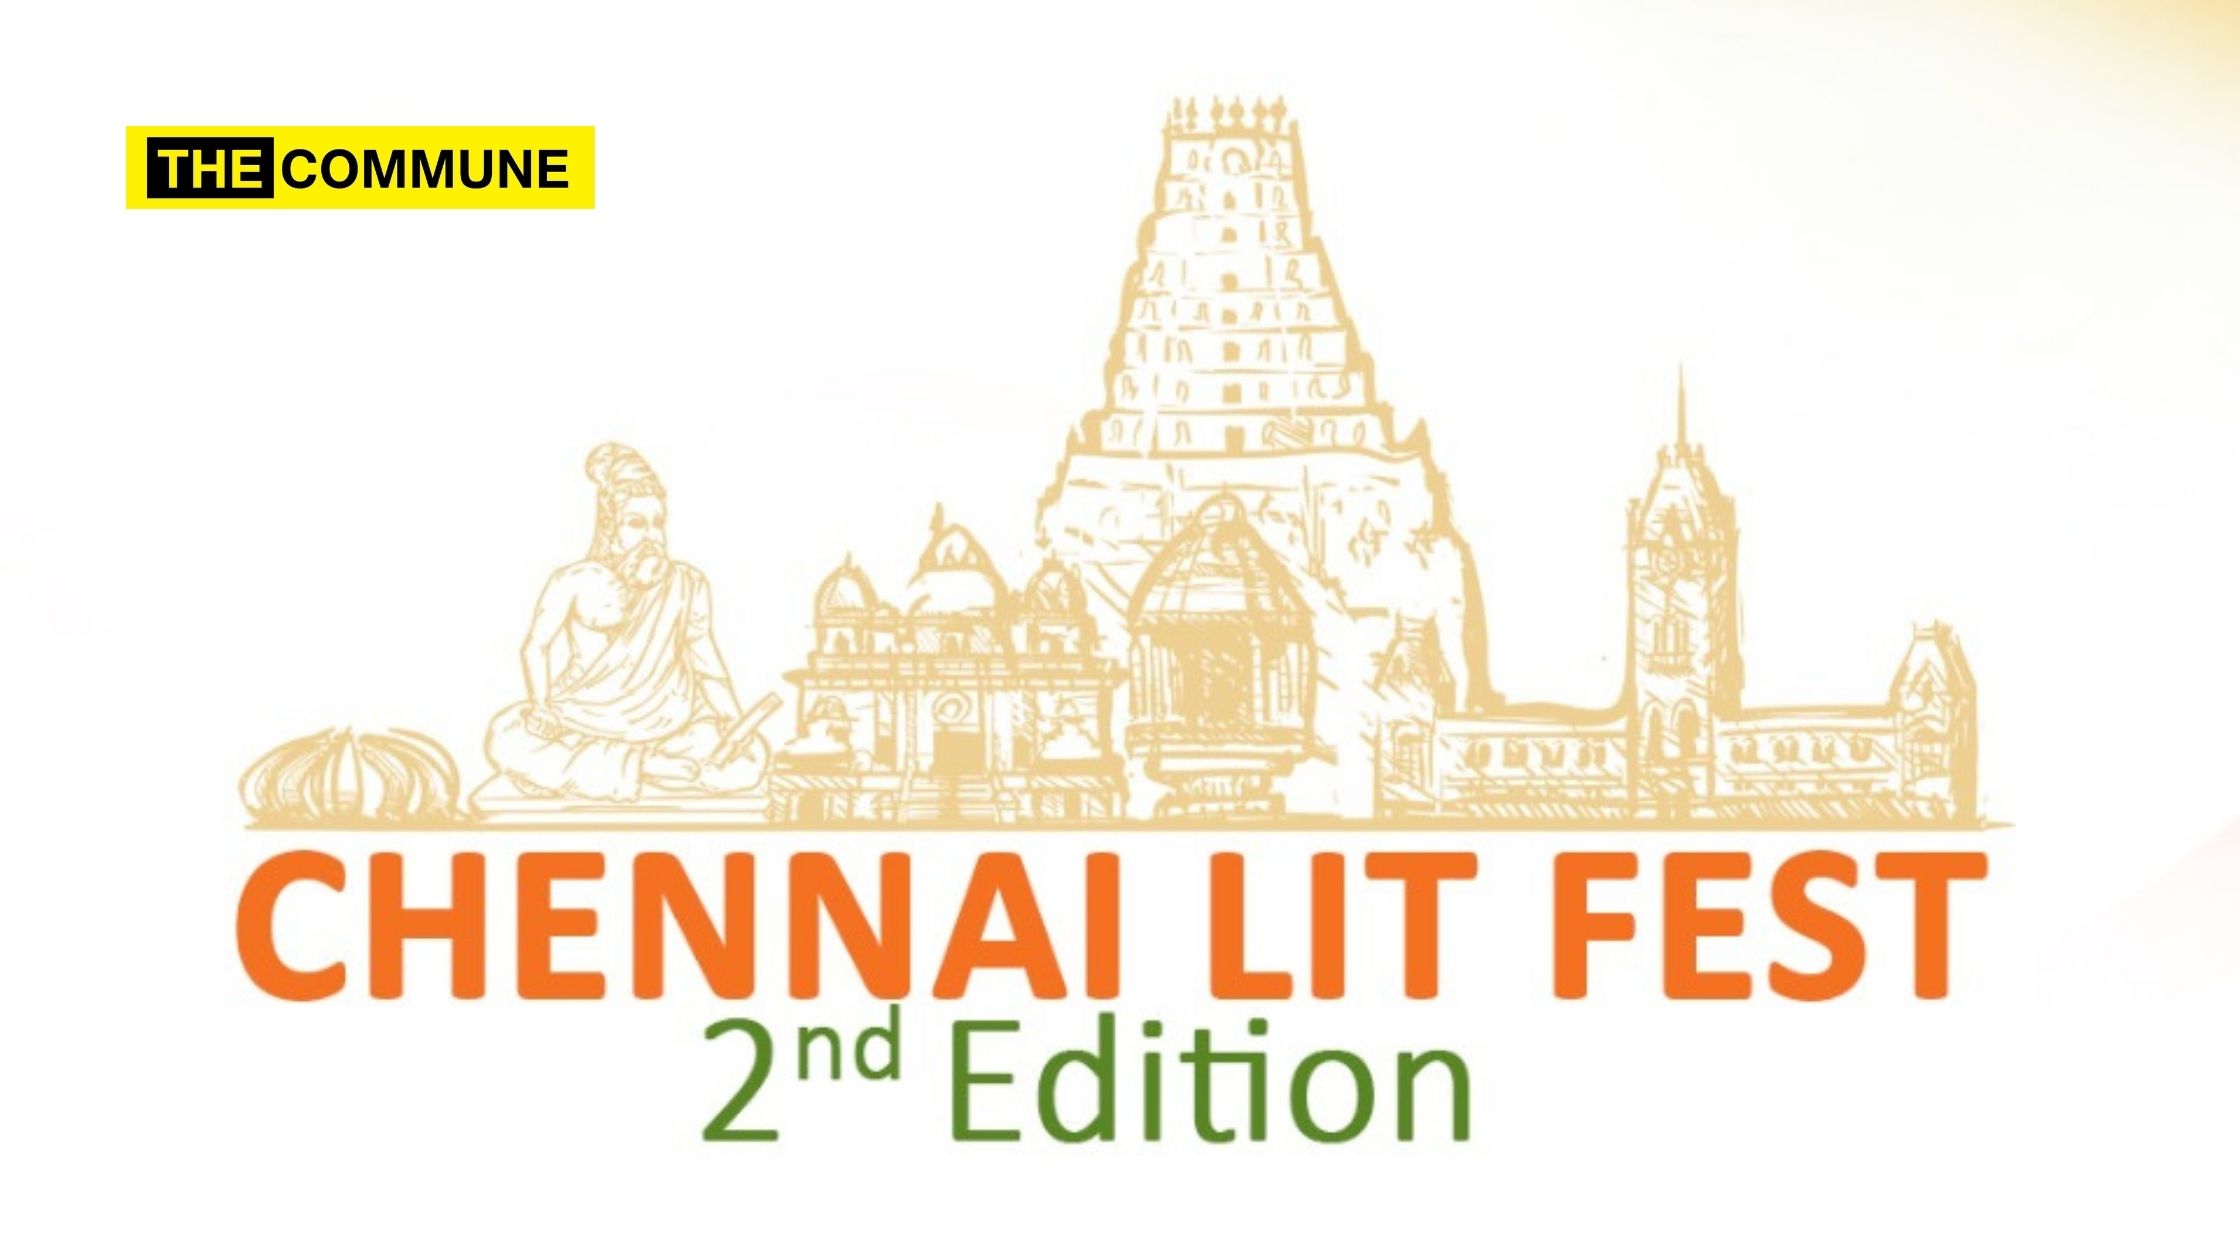 Chennai Lit Fest is back with its second edition The Commune